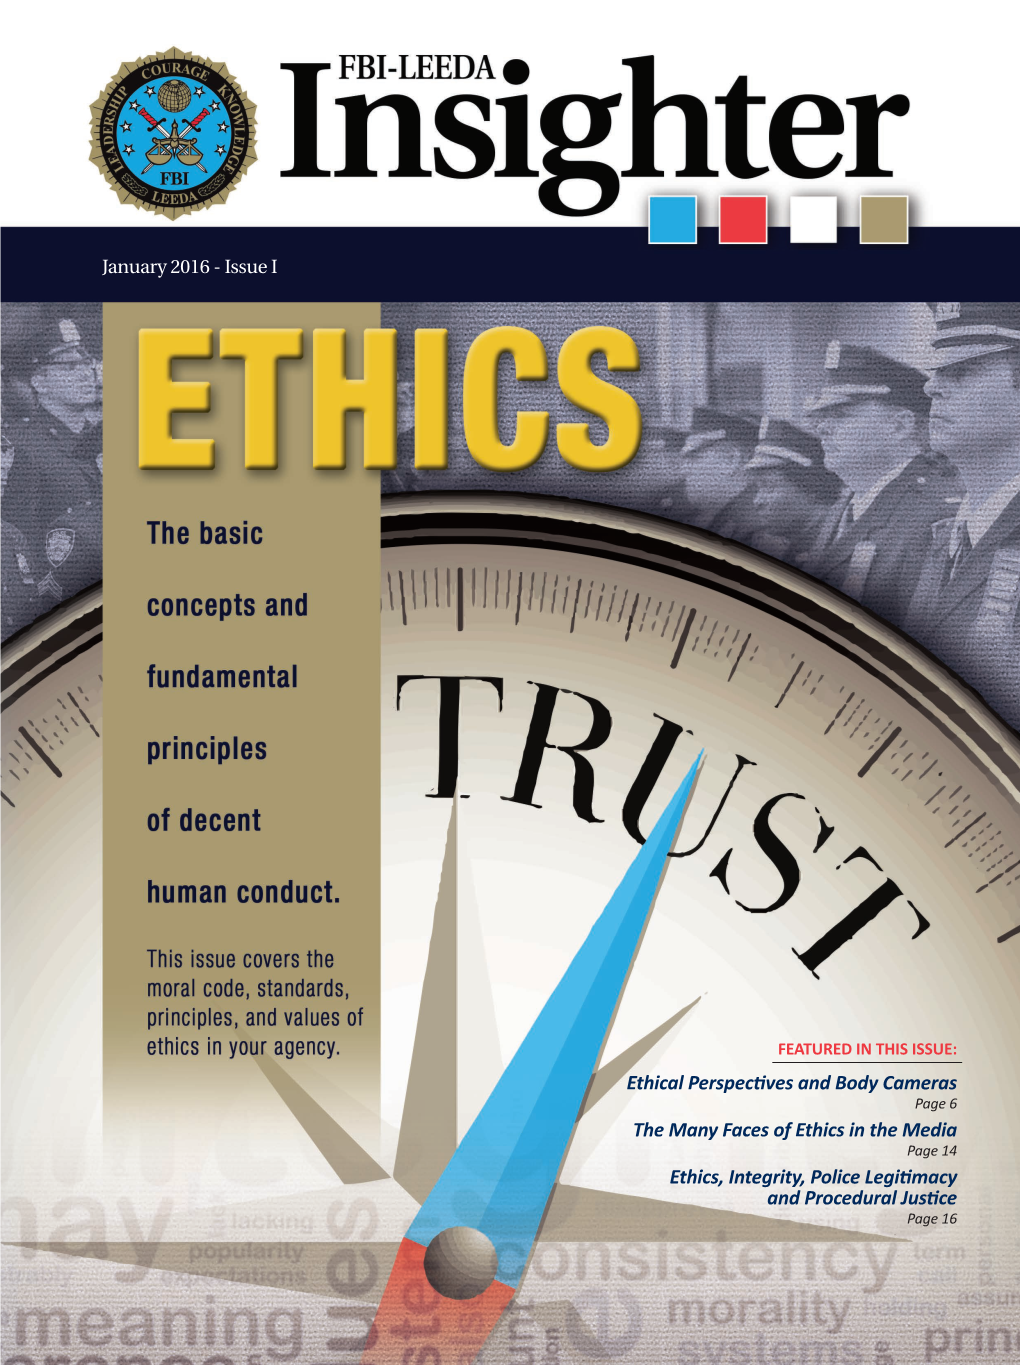 Ethical Perspectives and Body Cameras the Many Faces of Ethics